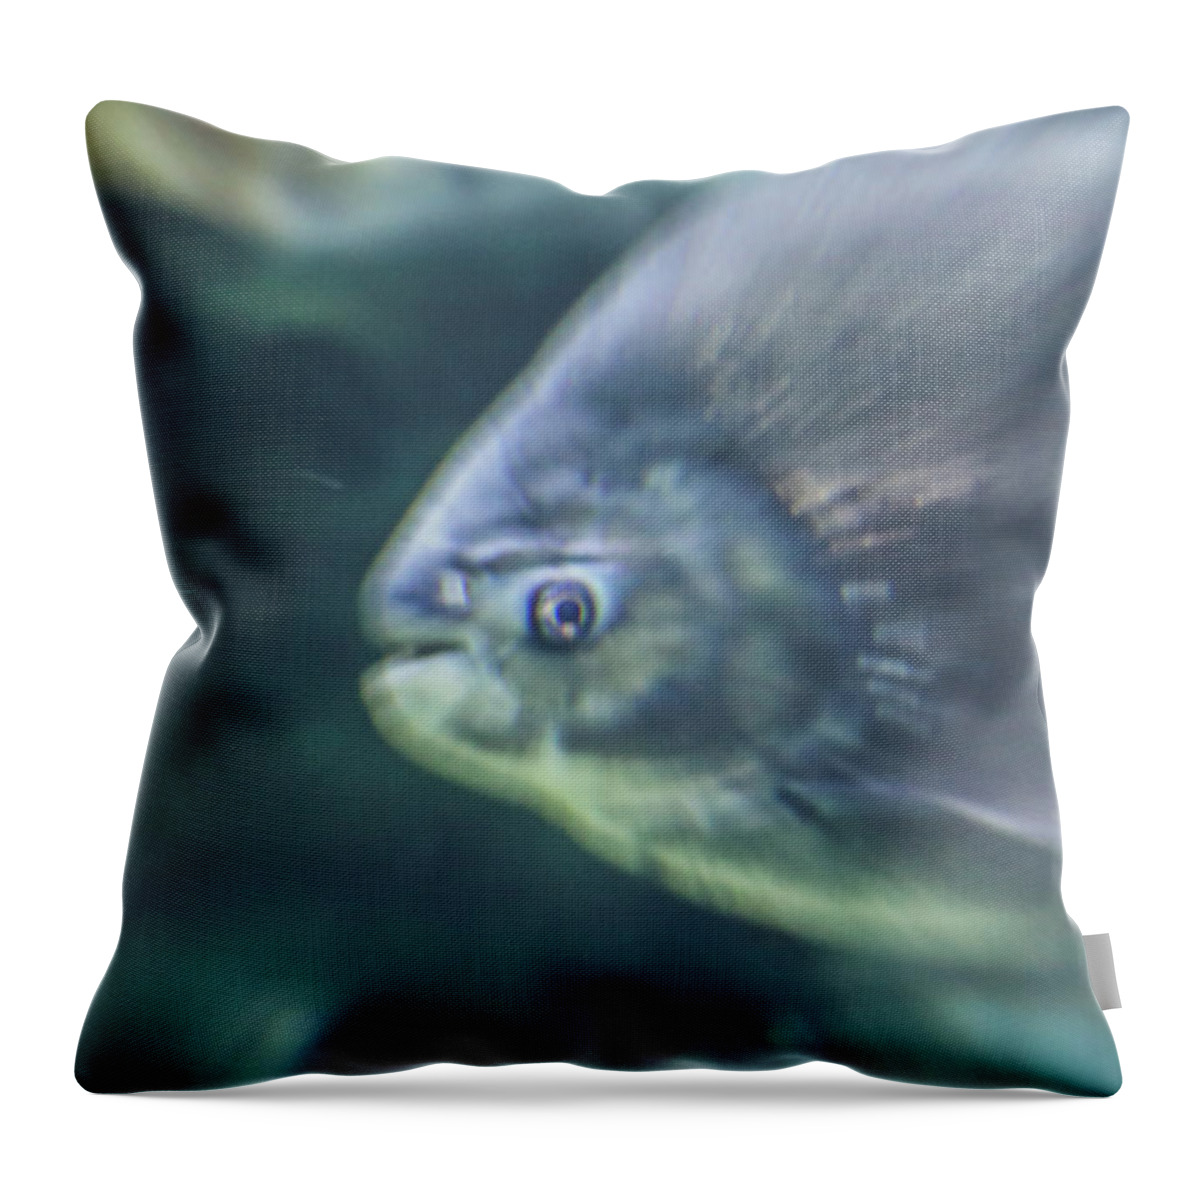 Fish Throw Pillow featuring the photograph Starring by Hyuntae Kim